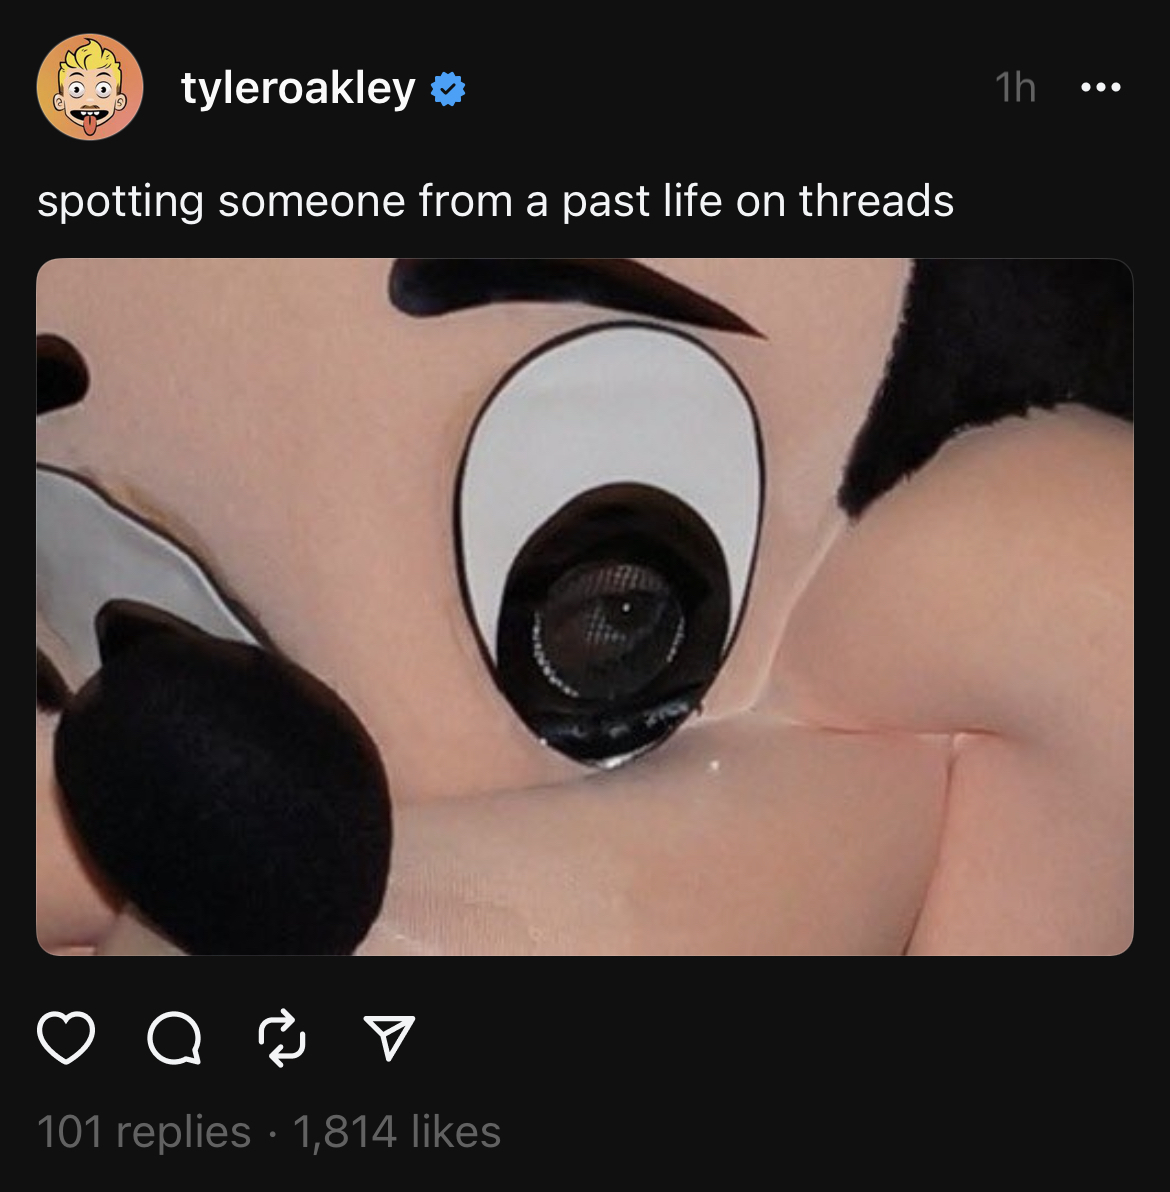 Tyler Oakley thread says &quot;spotting someone from a past life on threads&quot; with a closeup of the eye of the human inside a Mickey Mouse costume